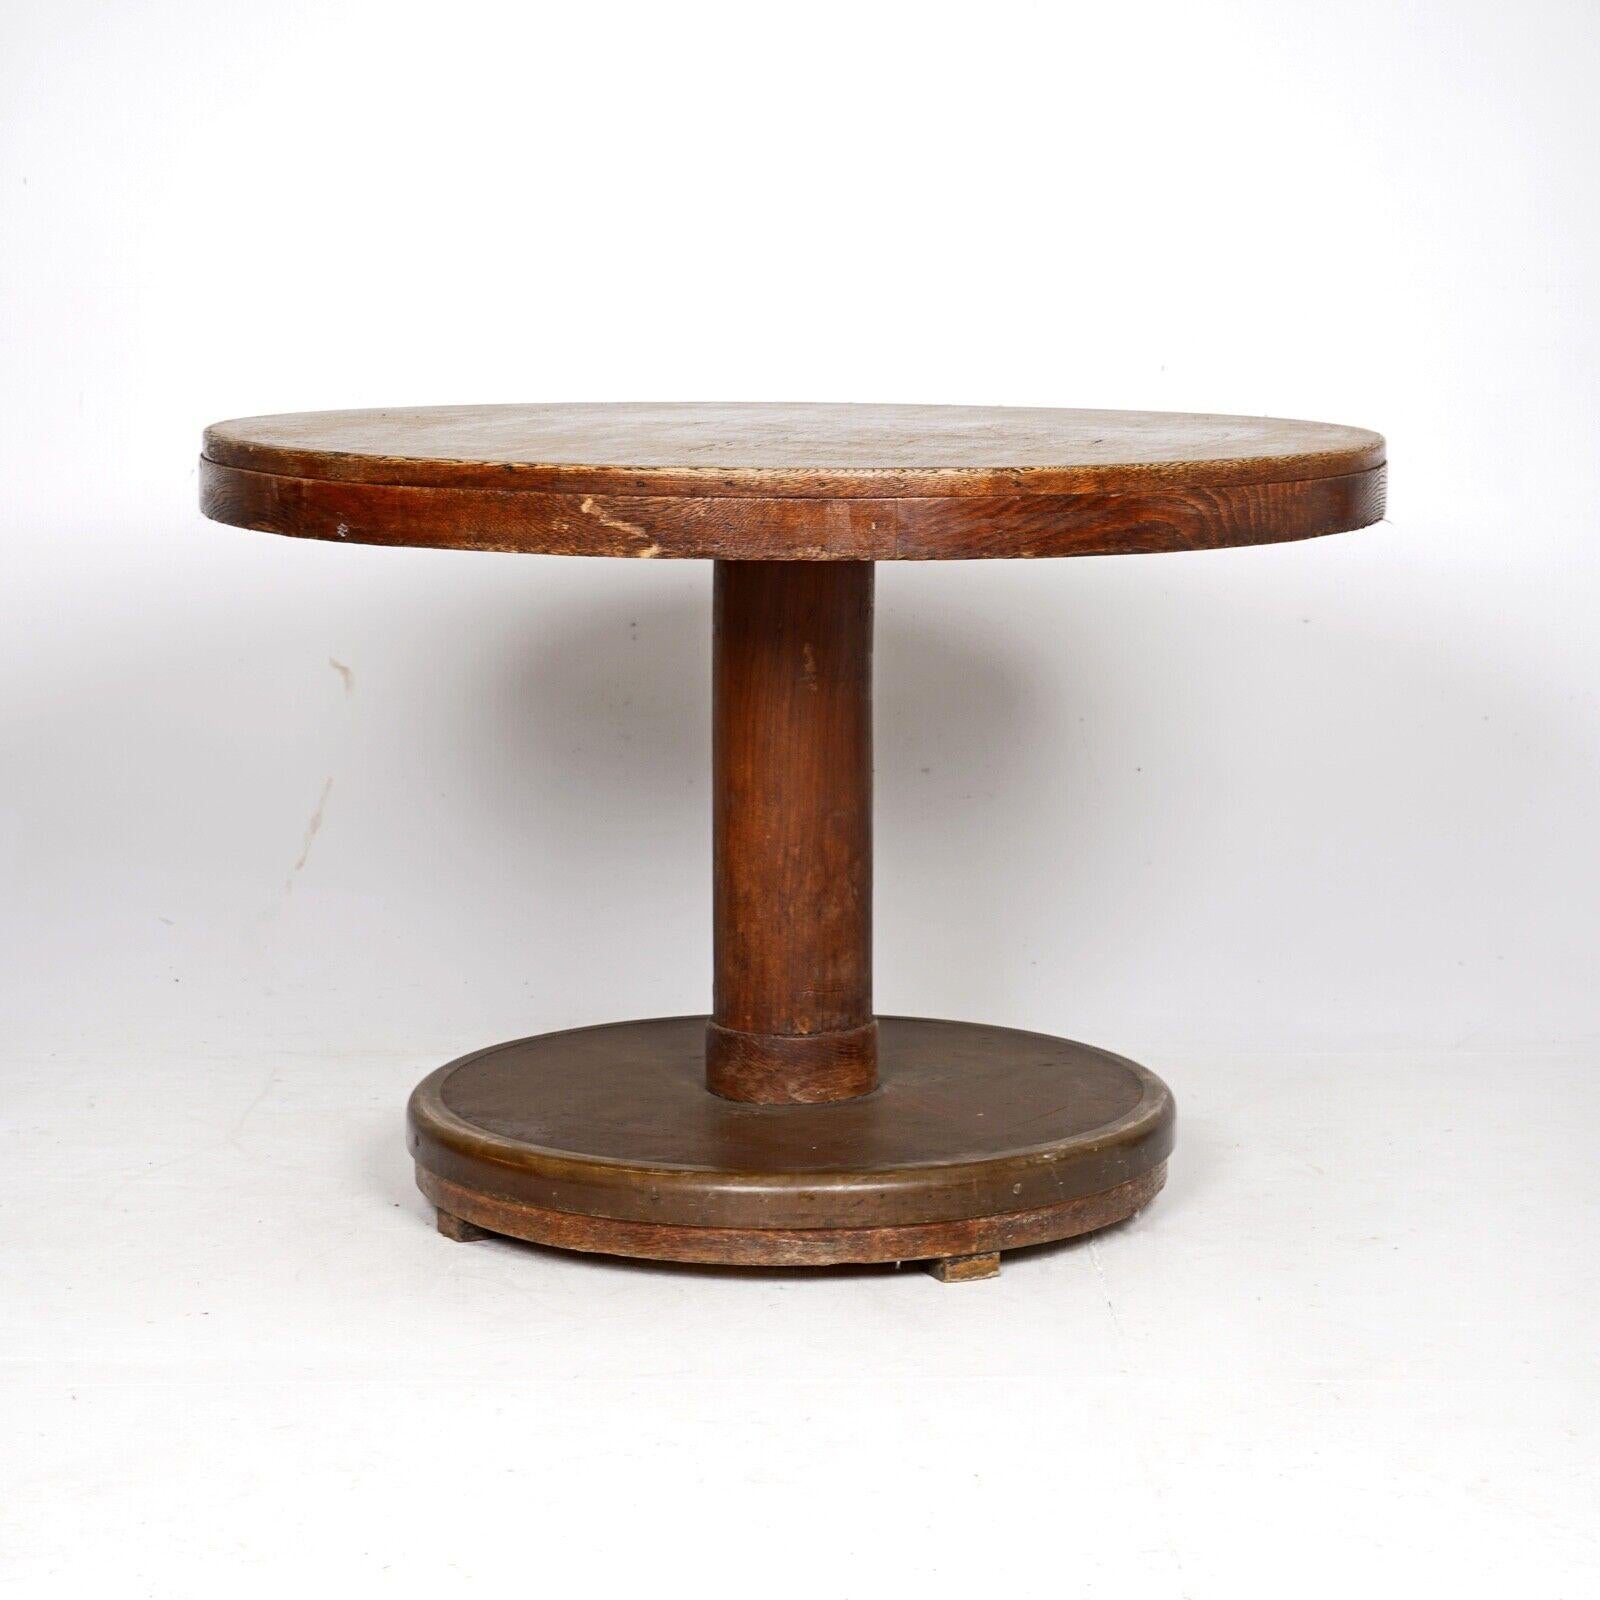  A beautifully simple pedestal dining table I was told came off a Cunard line ship.
Oak pedestal table, the base has a bronze trim around leather. 
The quality shows throughout the table, solid and very well made.

Condition 
Please do take a